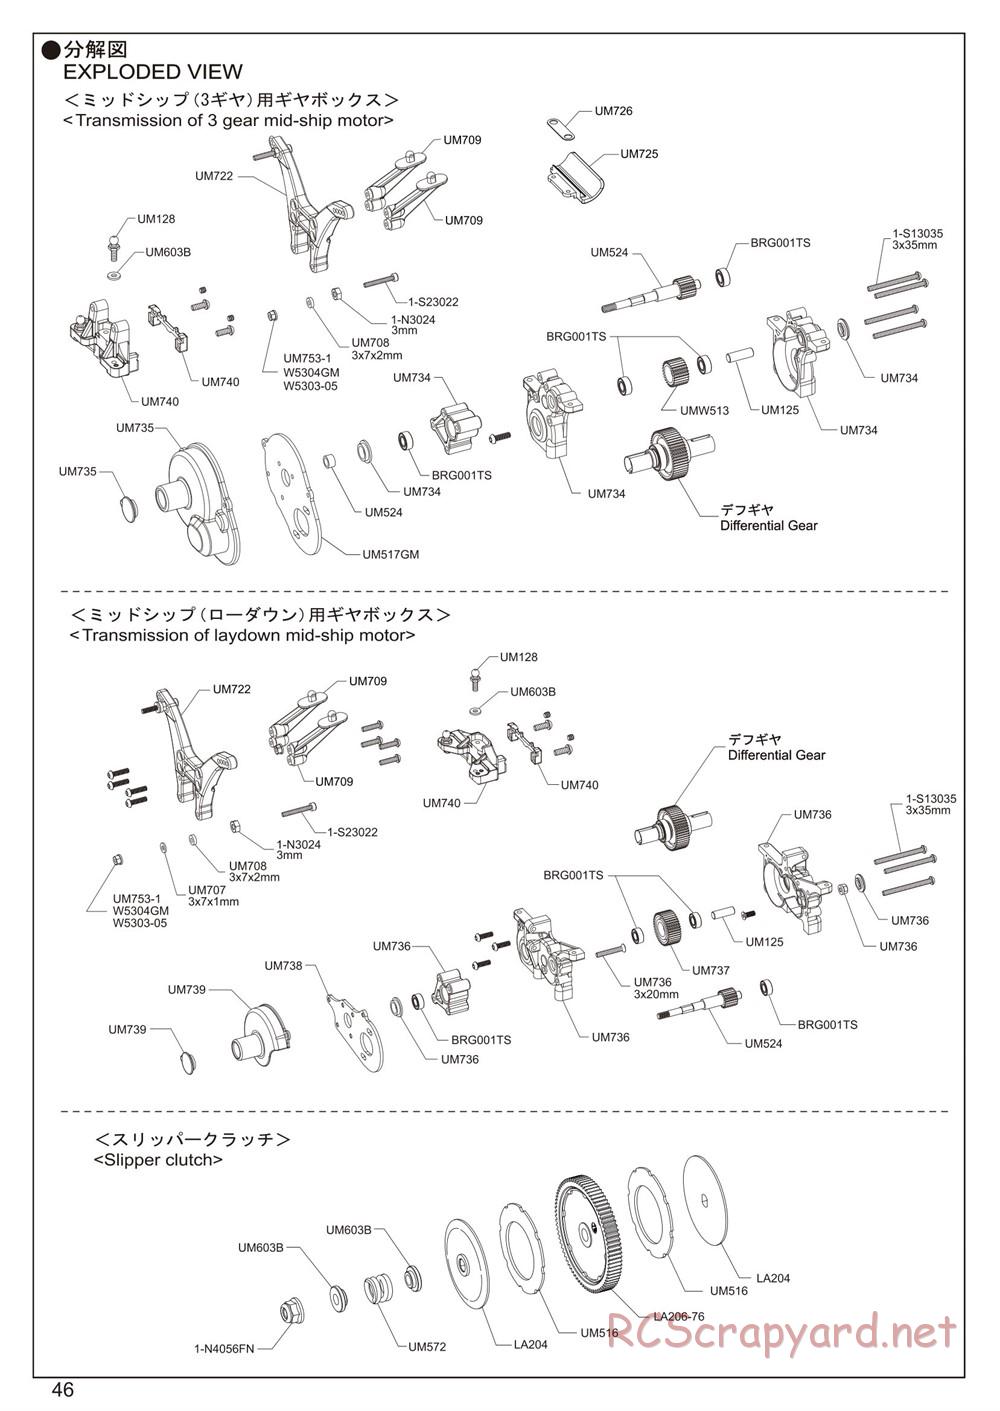 Kyosho - Ultima RB6.6 - Manual - Page 46